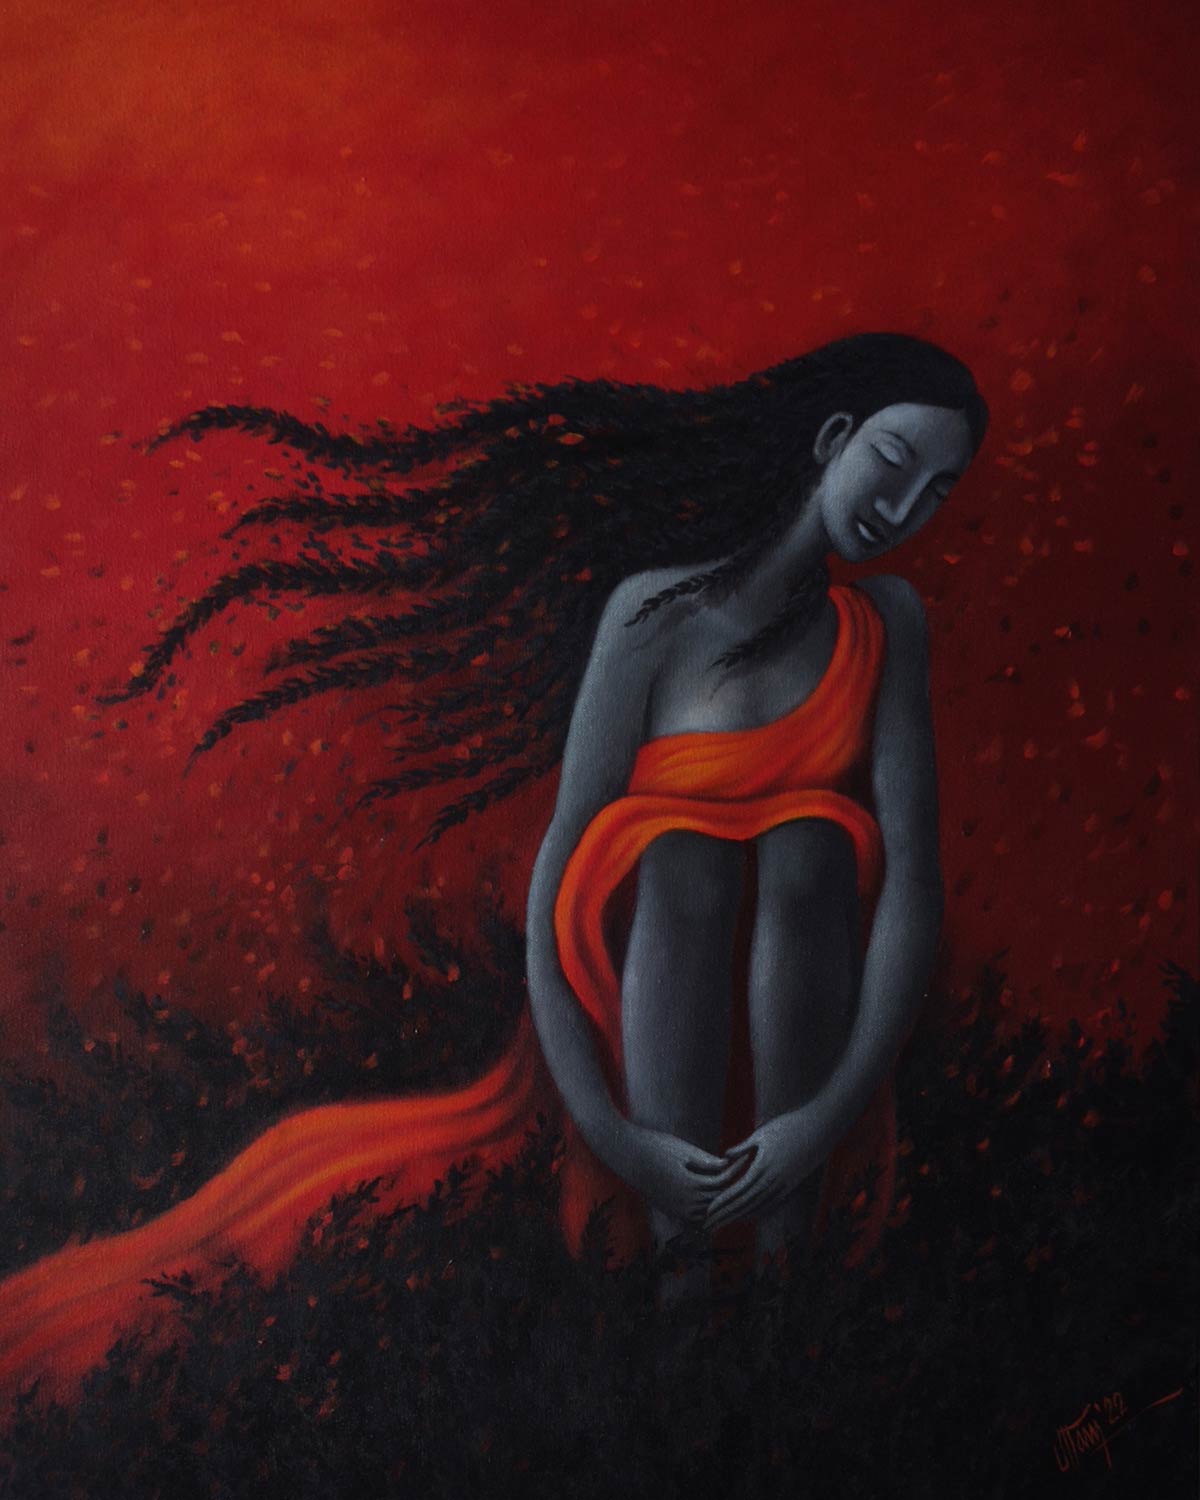 Figurative Painting with Acrylic on Canvas "Dreams within" art by Uttam Bhattacharya